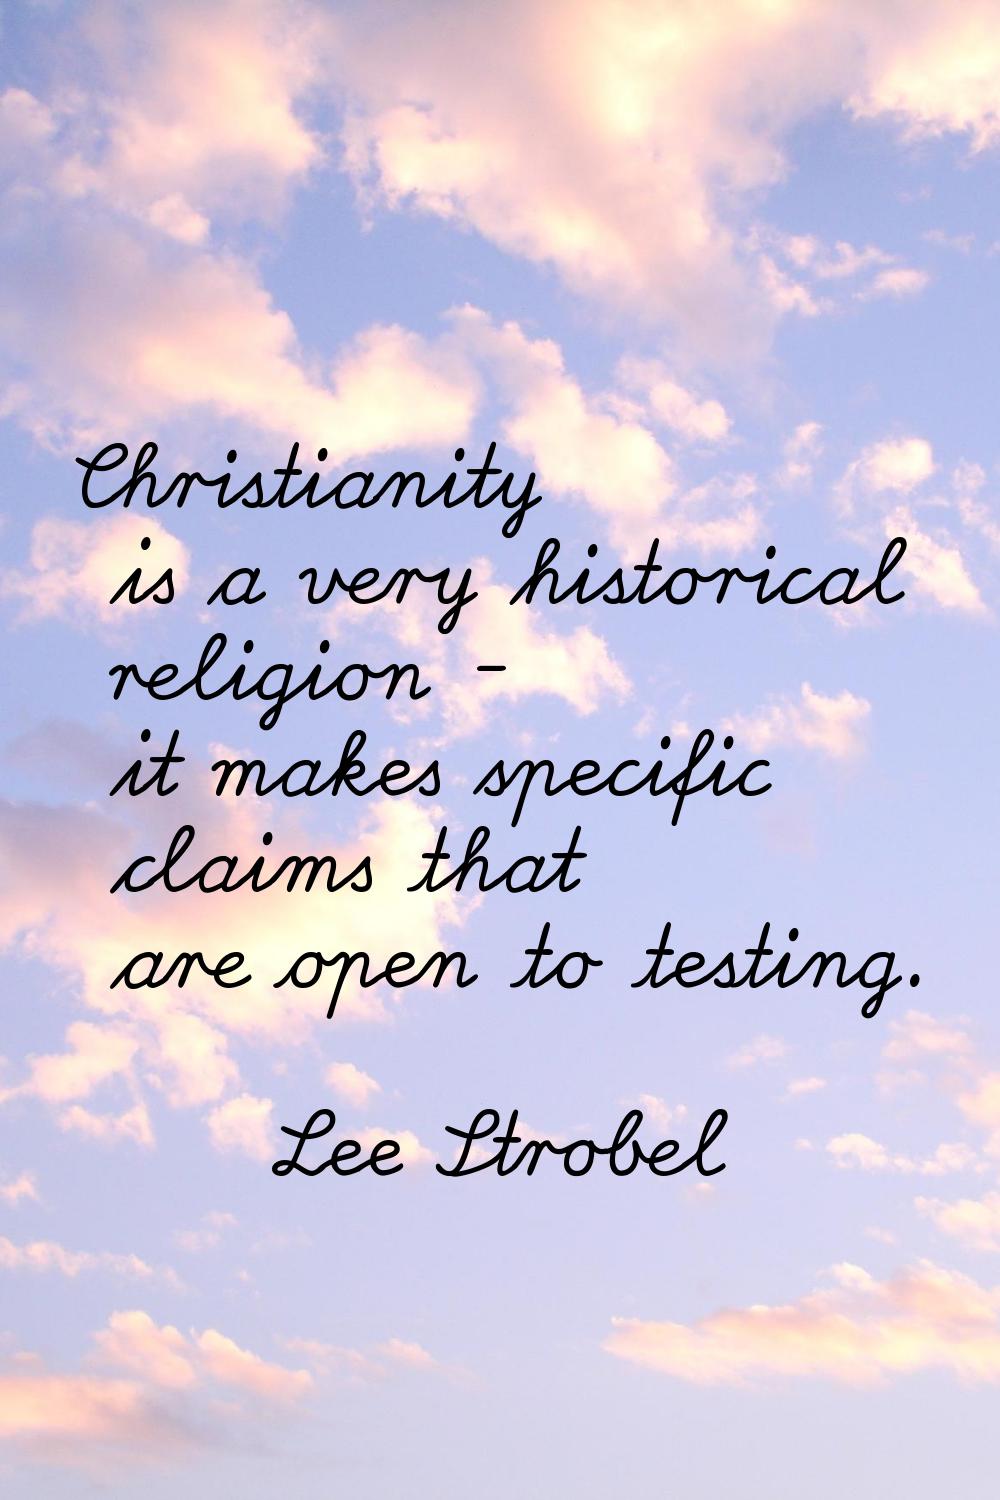 Christianity is a very historical religion - it makes specific claims that are open to testing.